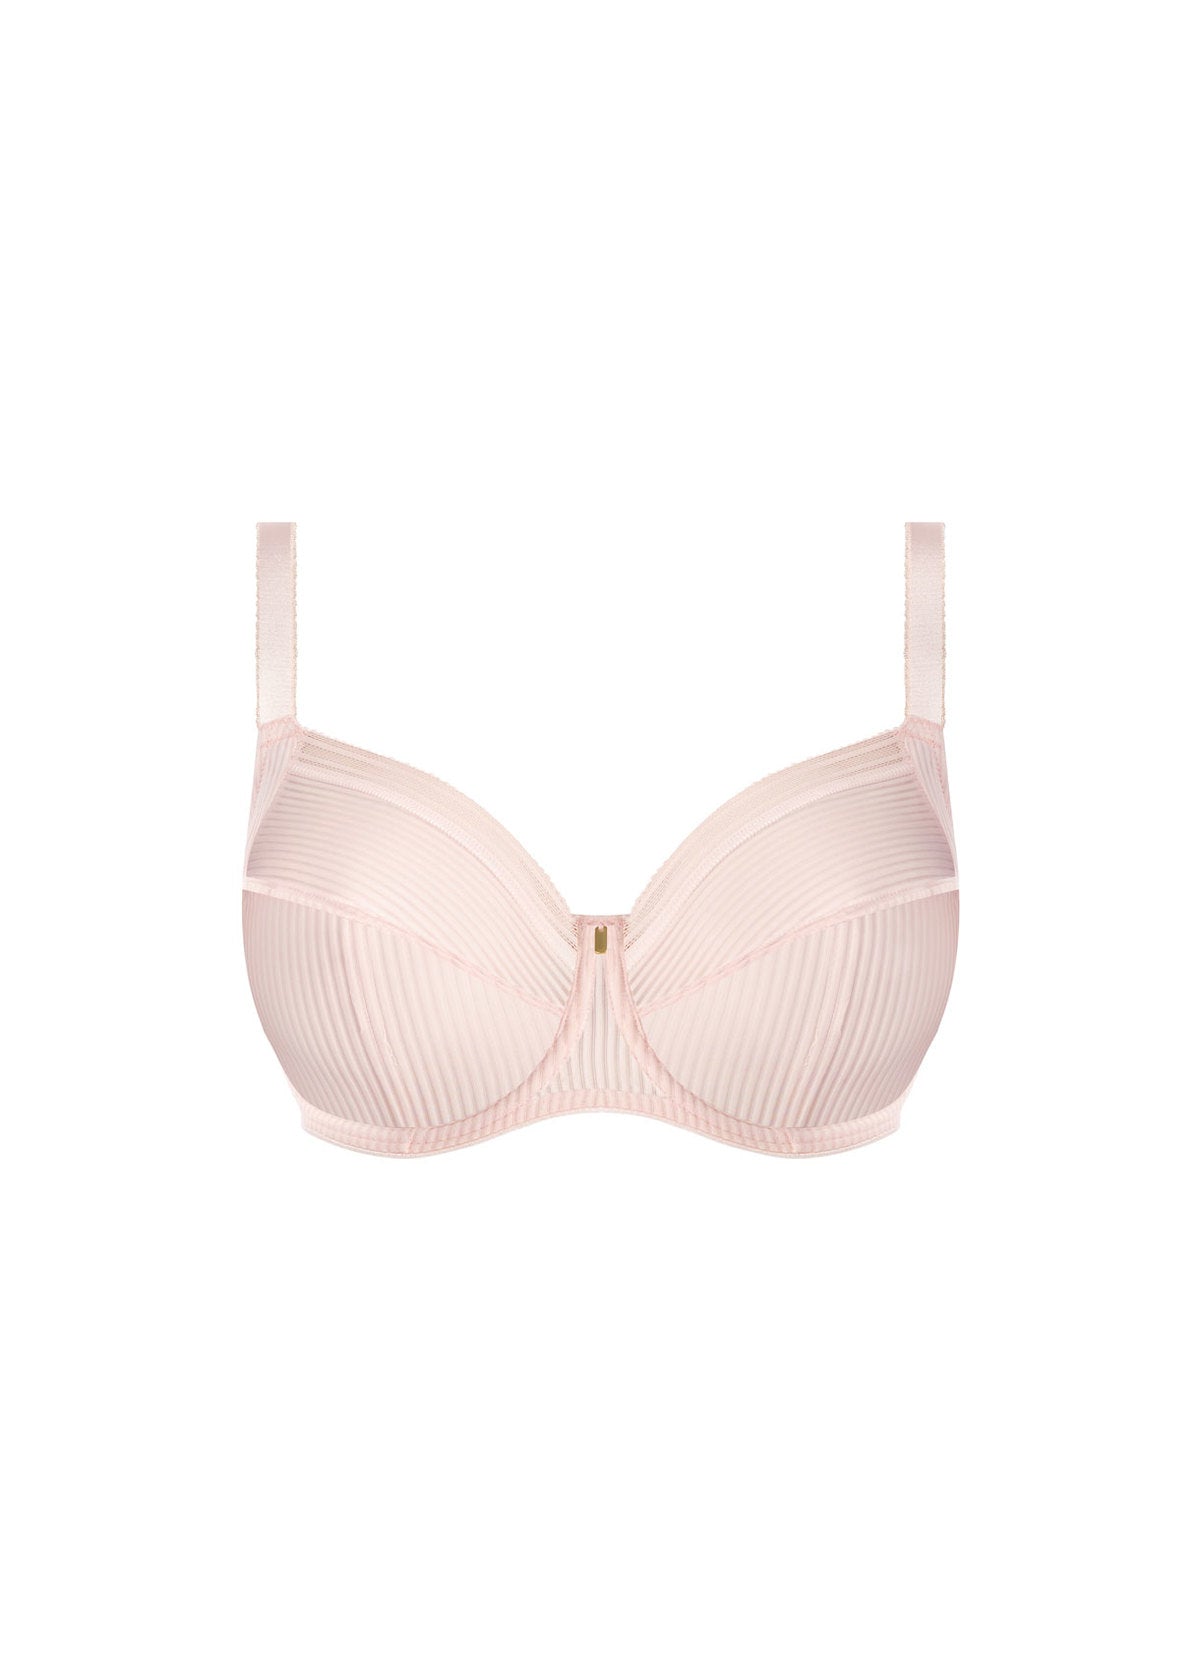 Buy Fantasie Fusion Underwire Full Cup Side Support Bra from the